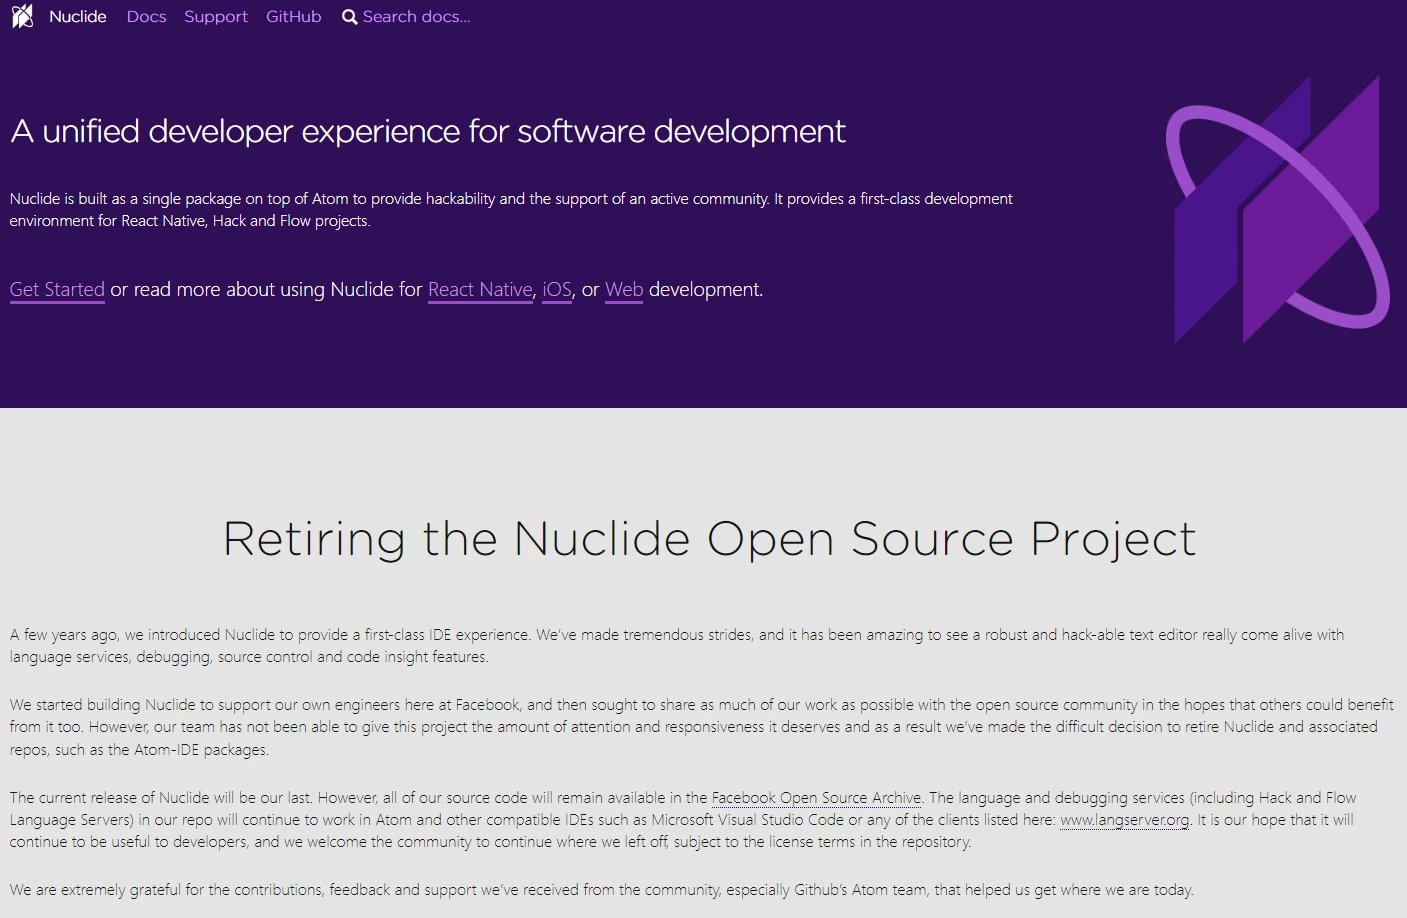 Nuclide - A Unified Developer Experience For Software Development